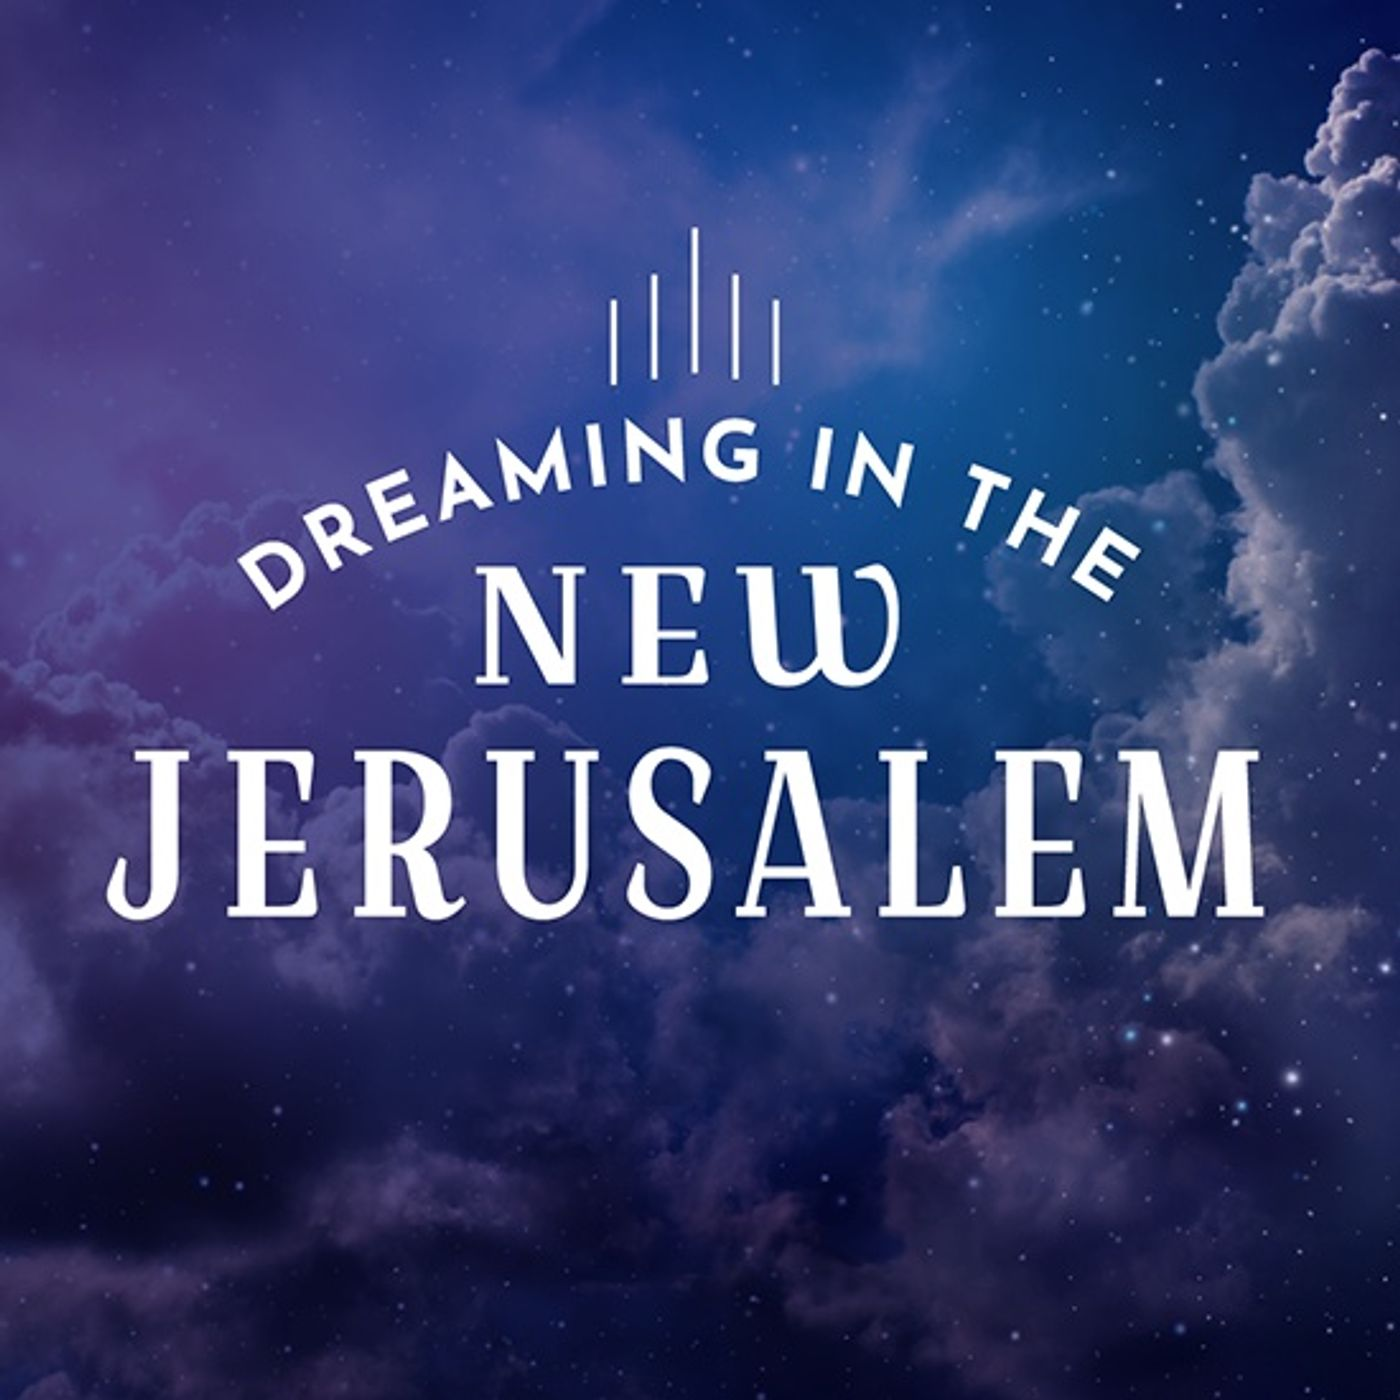 Dreaming in the New Jerusalem